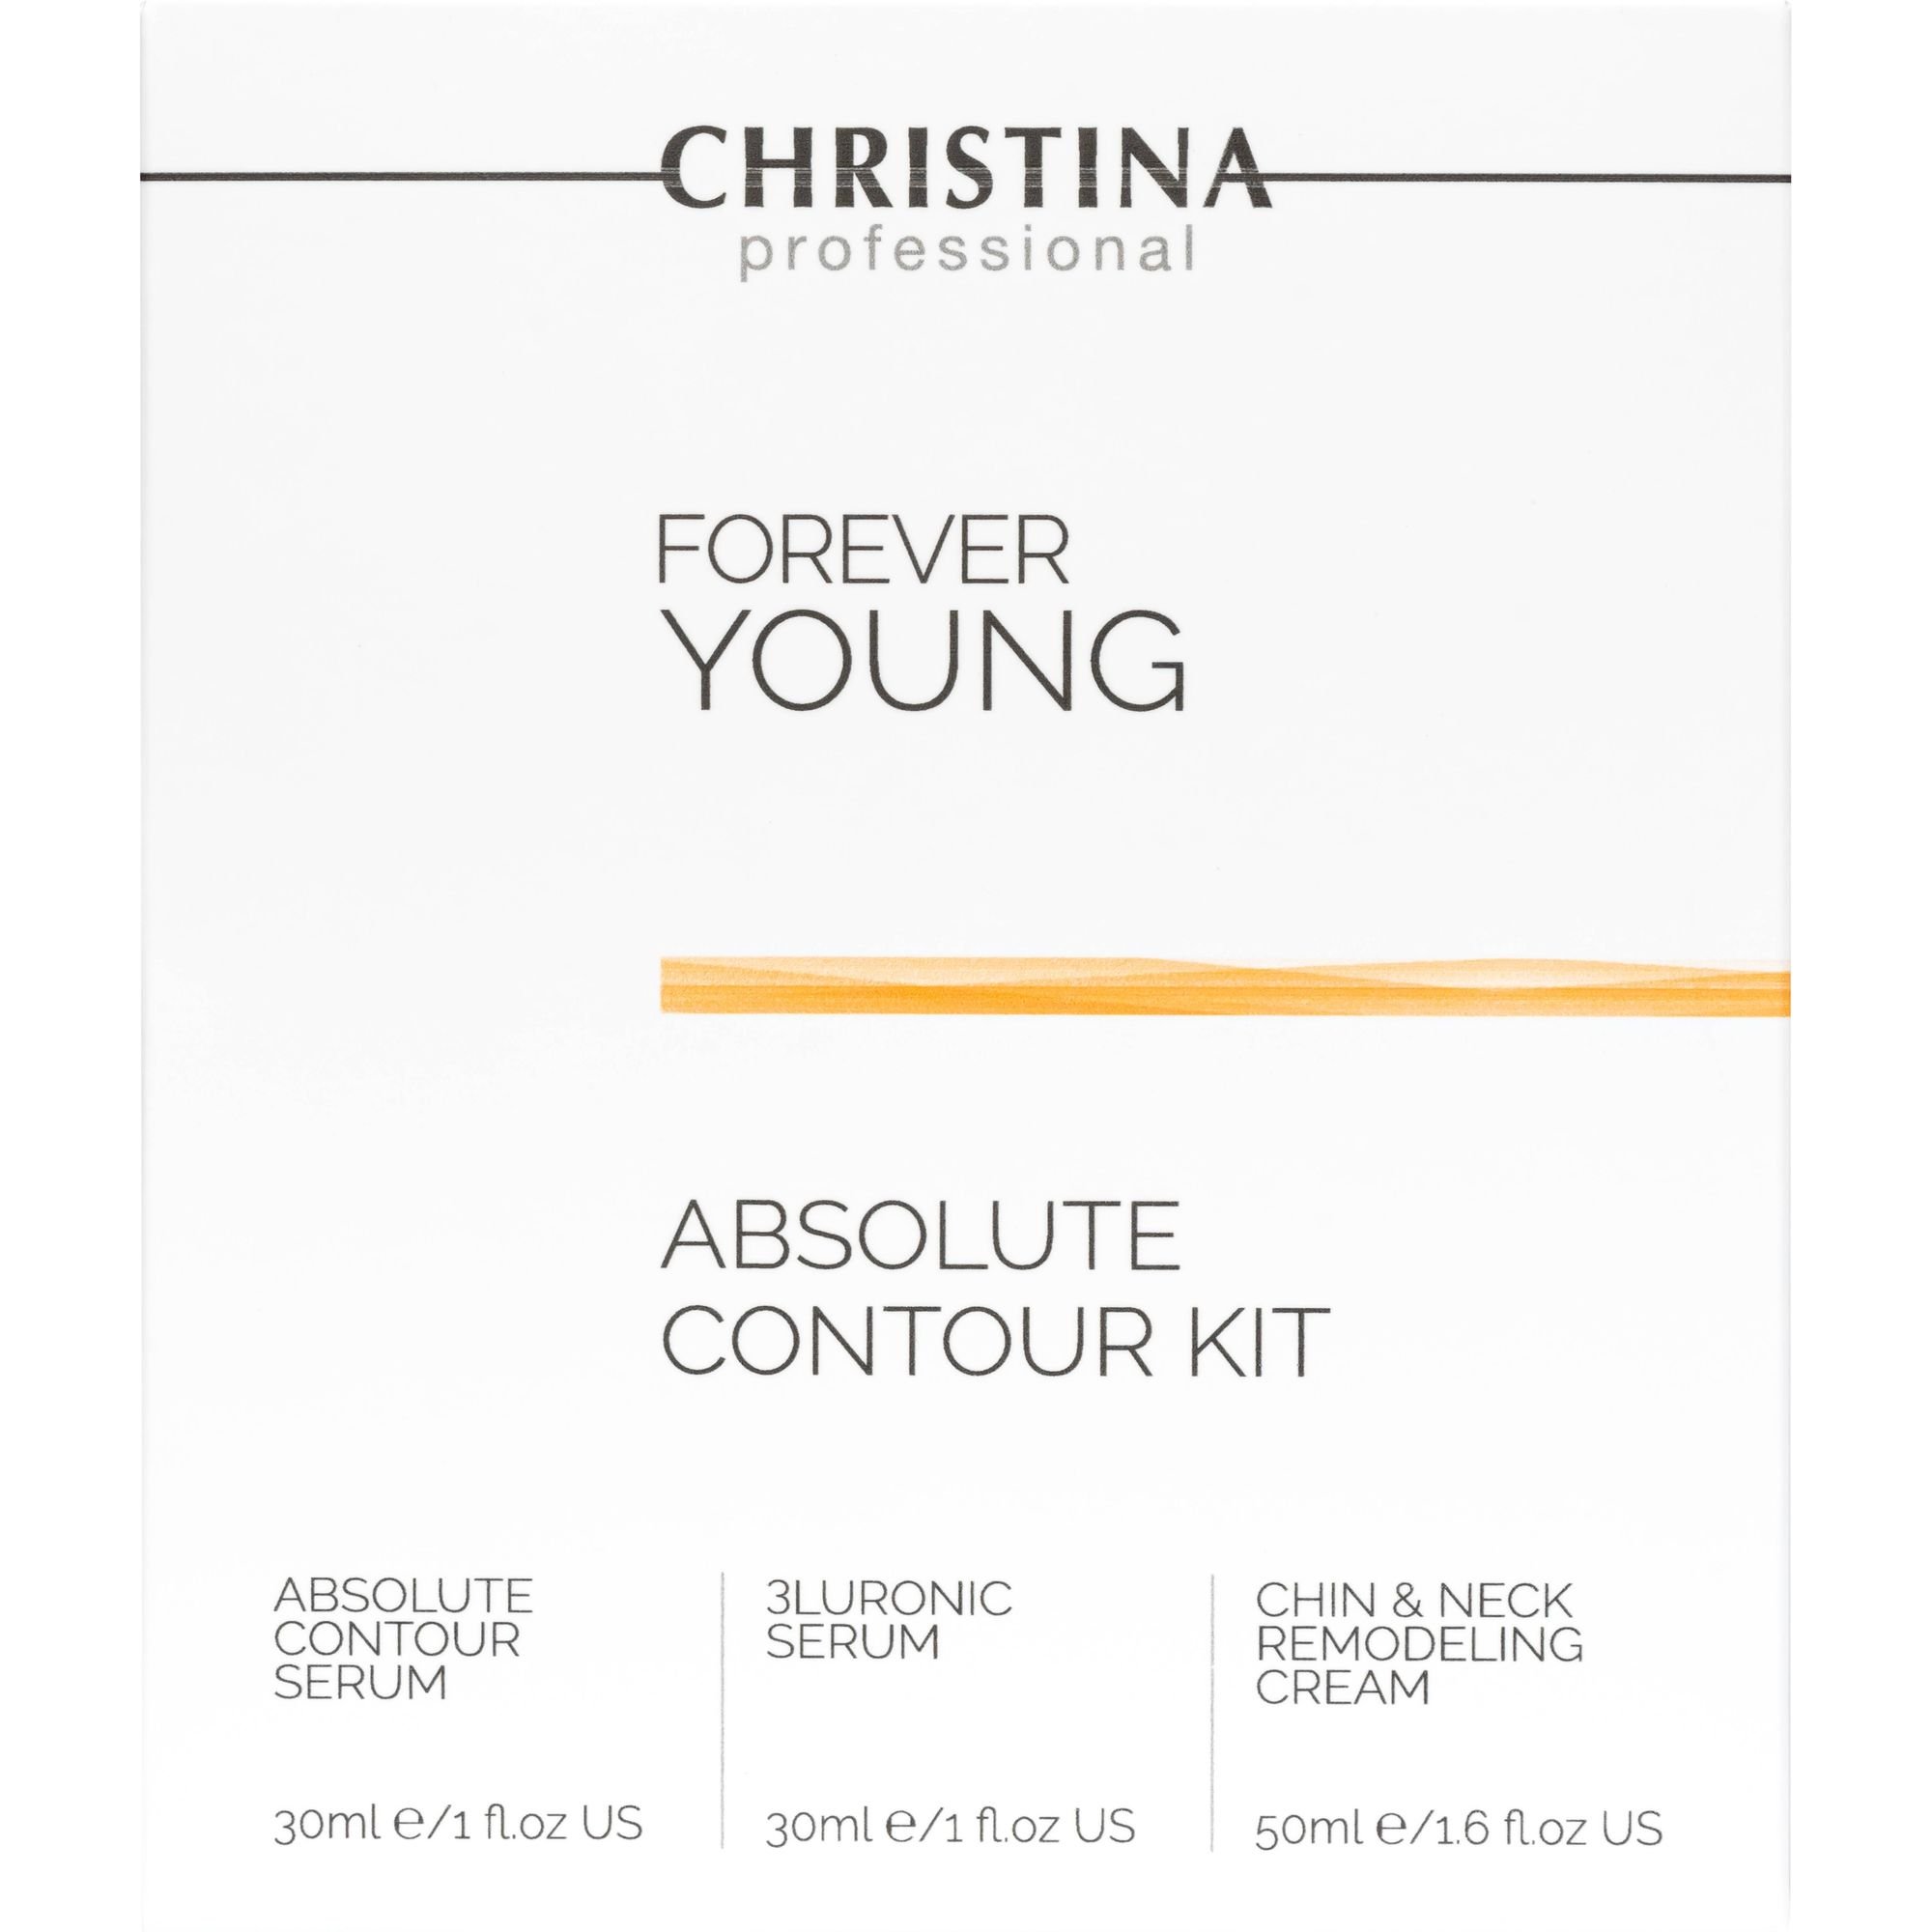 Набір Christina Forever Young Absolute Contour Kit: Absolute Contour Serum 30 мл + 3Luronic Serum 30 мл + Chin & Neck Remodeling Cream 50 мл - фото 2